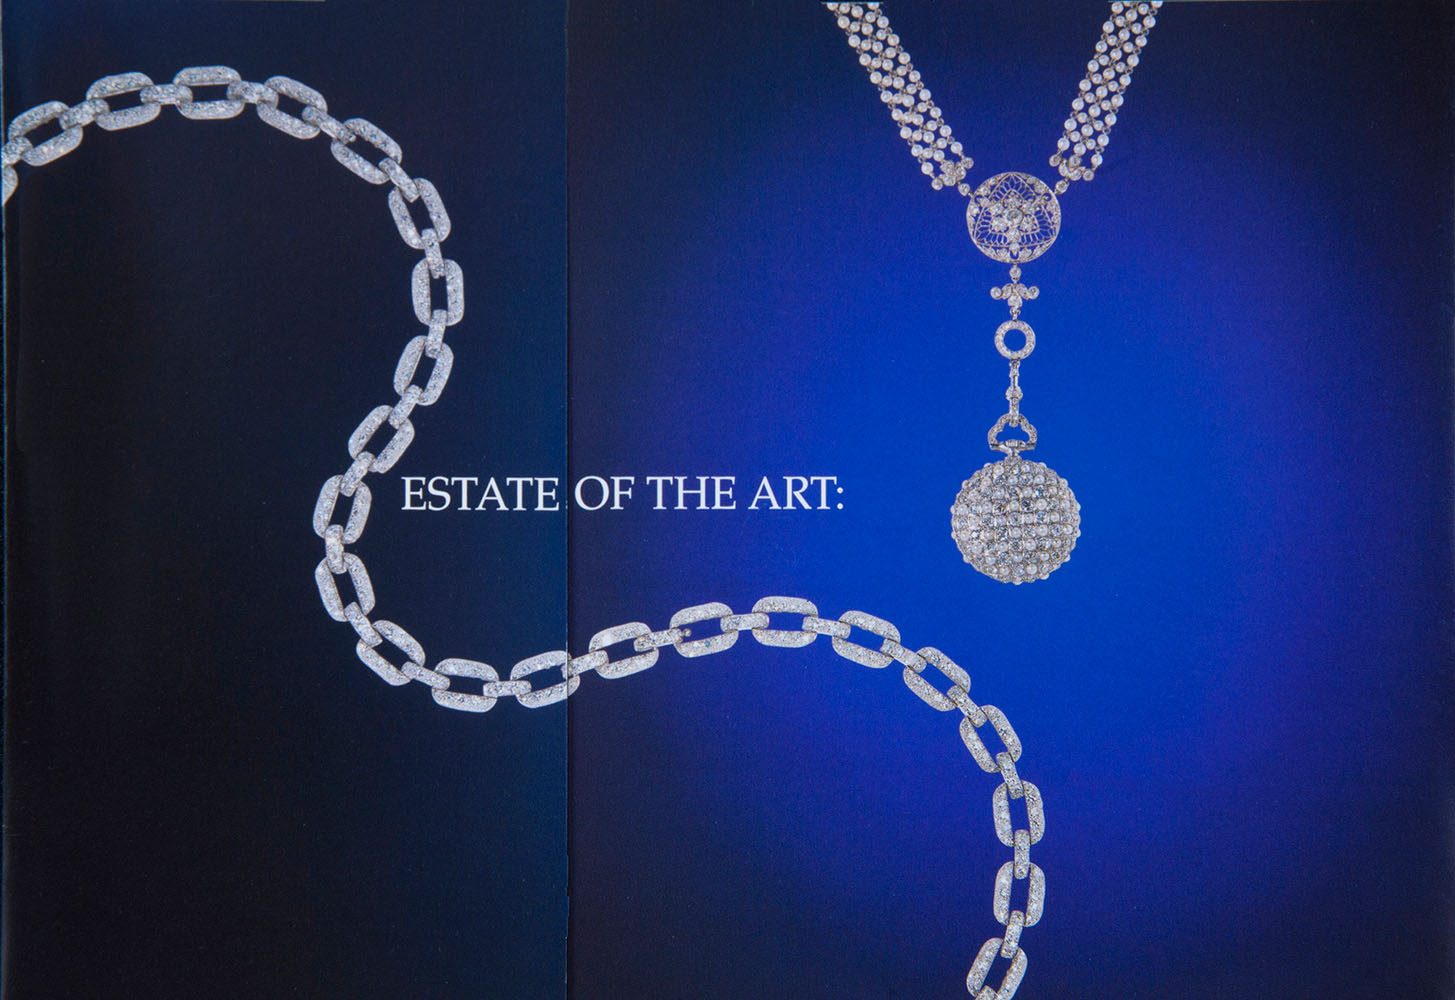 Cover of our gate-fold Betteridge “Estate Of The Art” estate jewelry of direct marketing piece.